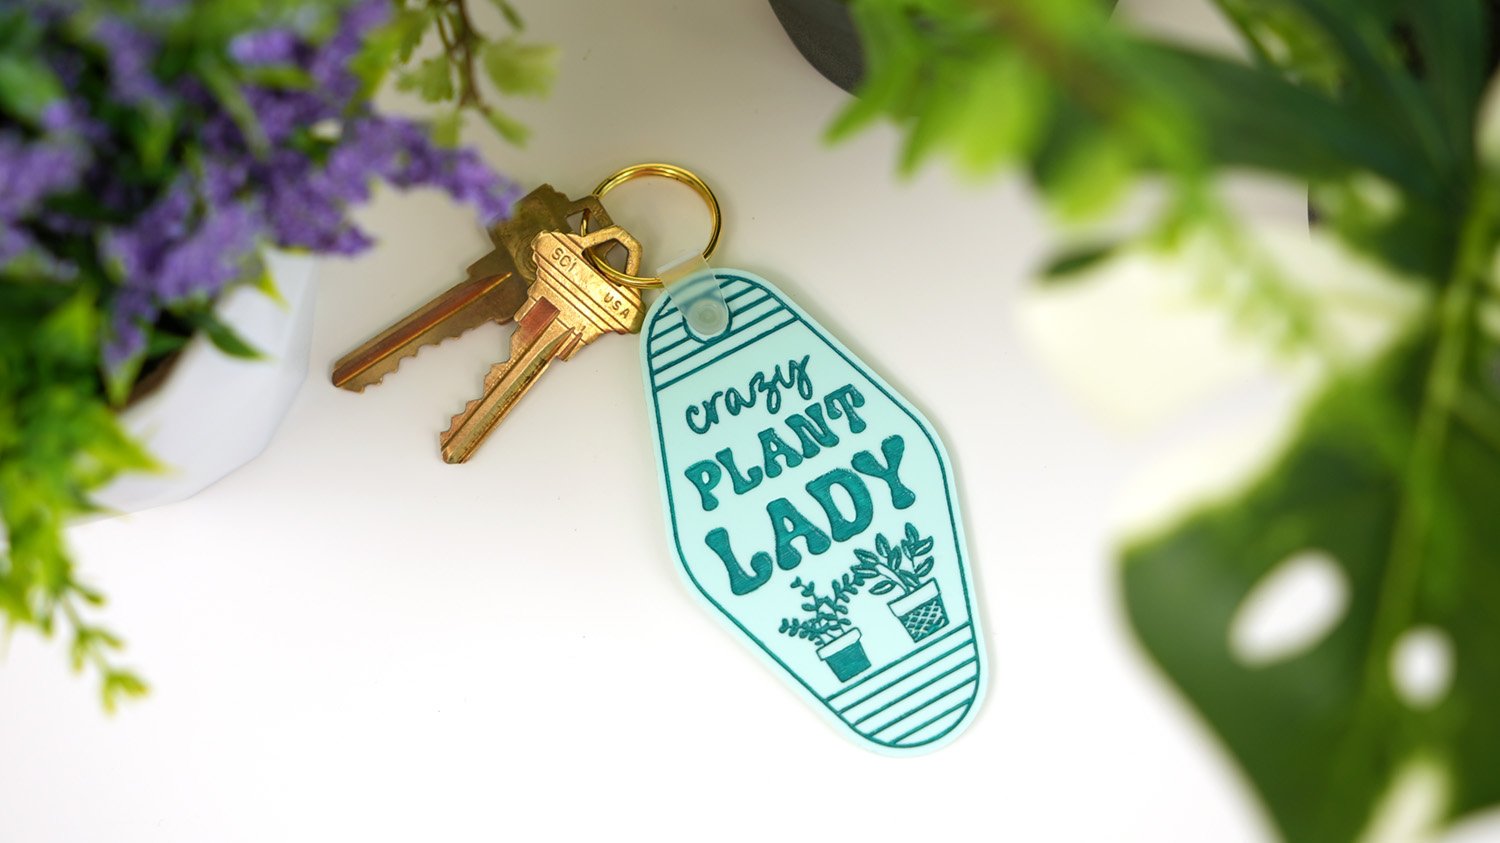 "Crazy plant lady" motel-style acrylic keychain surrounded by plants